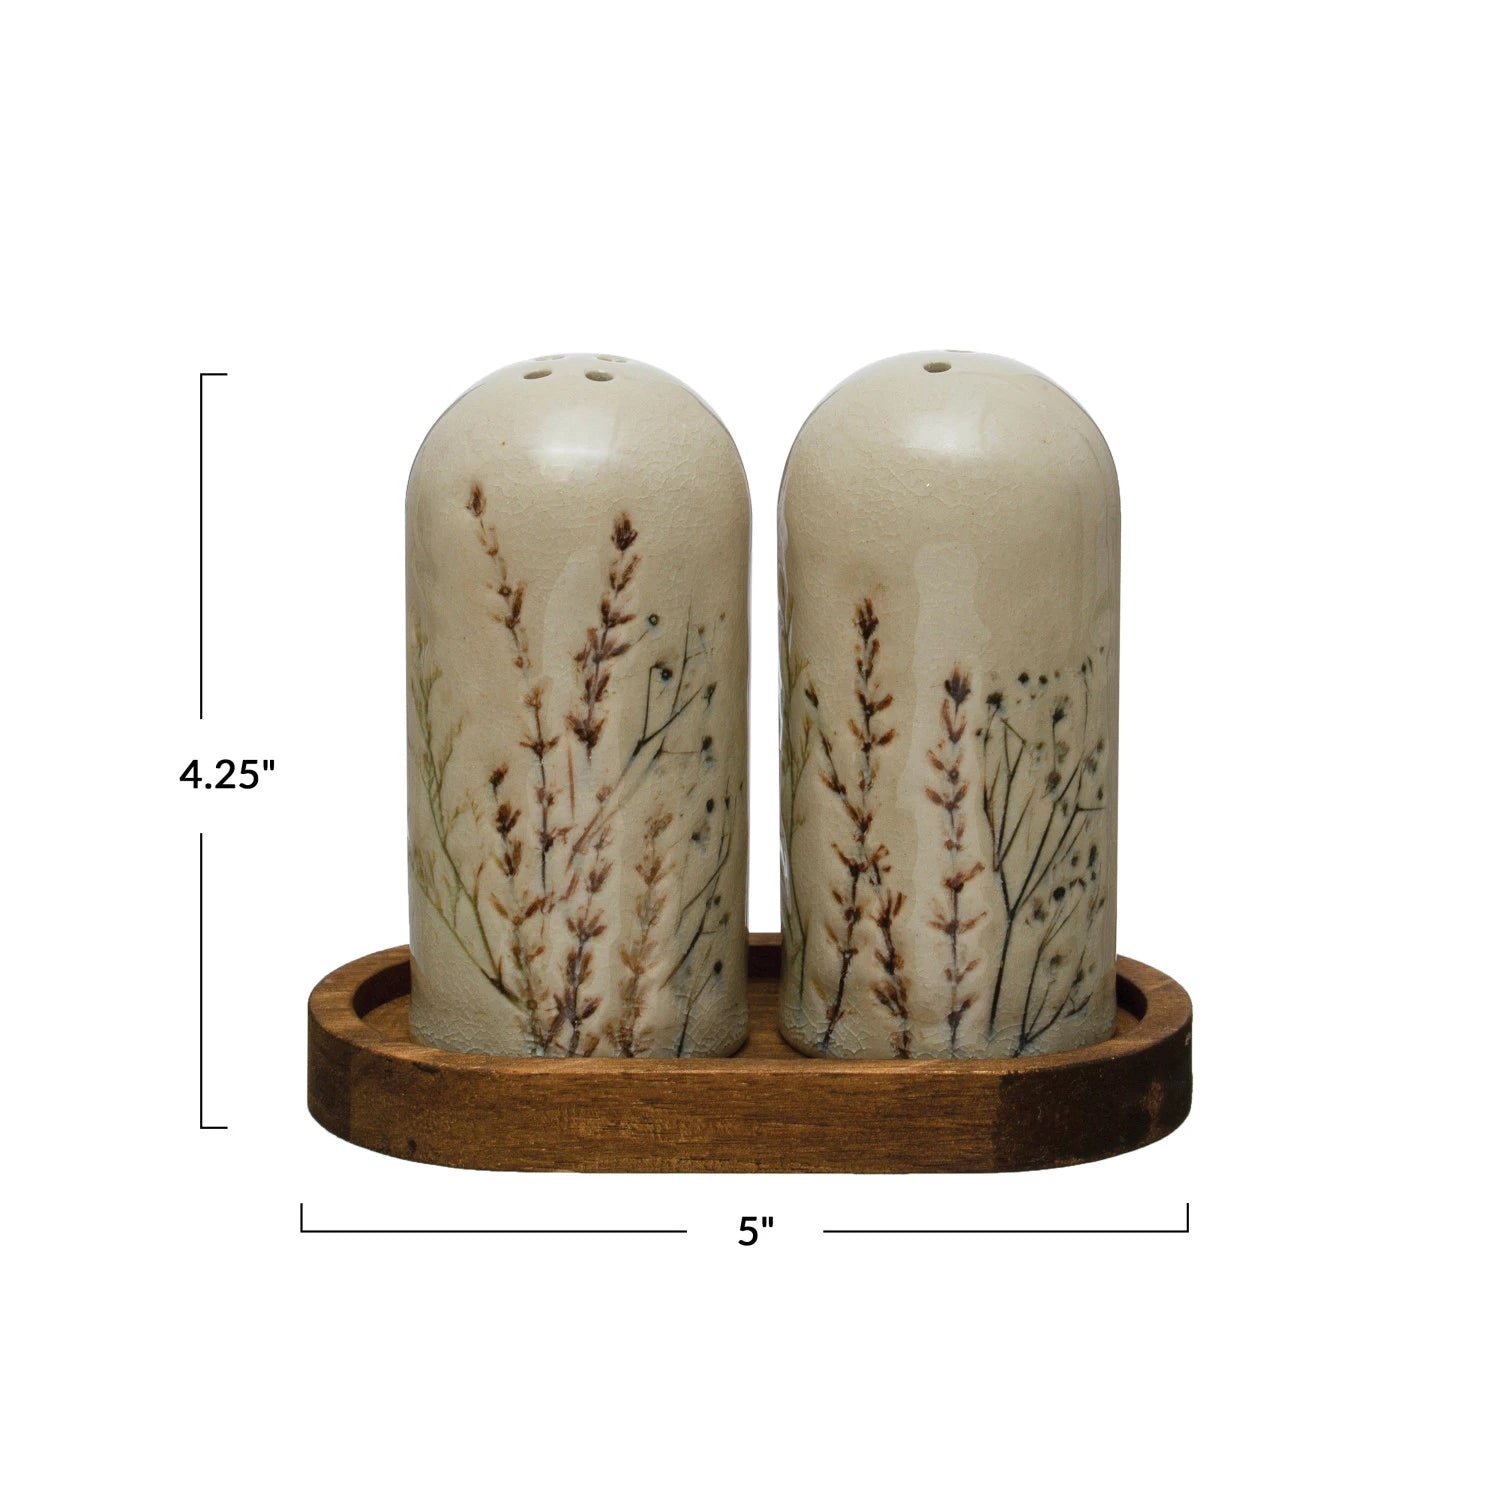 Measurements of the debossed stoneware floral salt and pepper shakers with wooden tray.